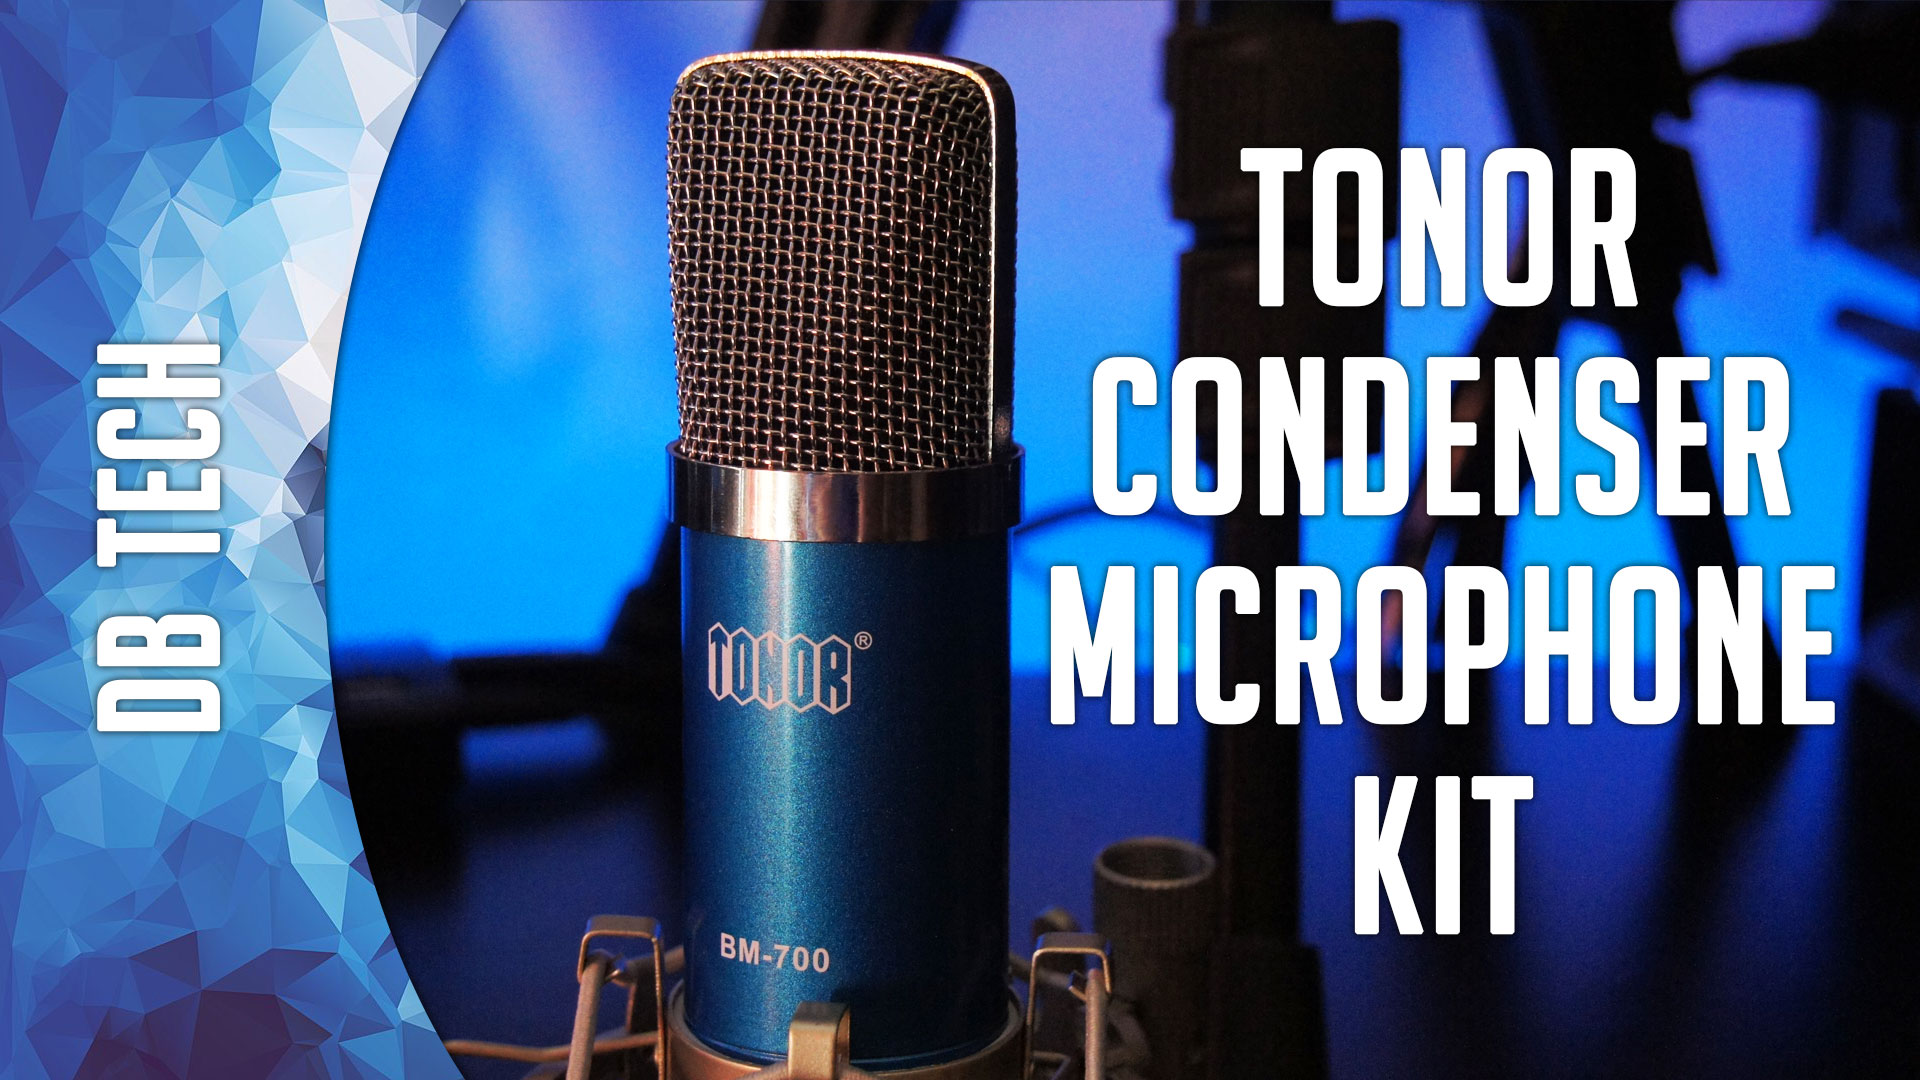 Tonor Condenser Microphone Kit Review - DB Tech Reviews